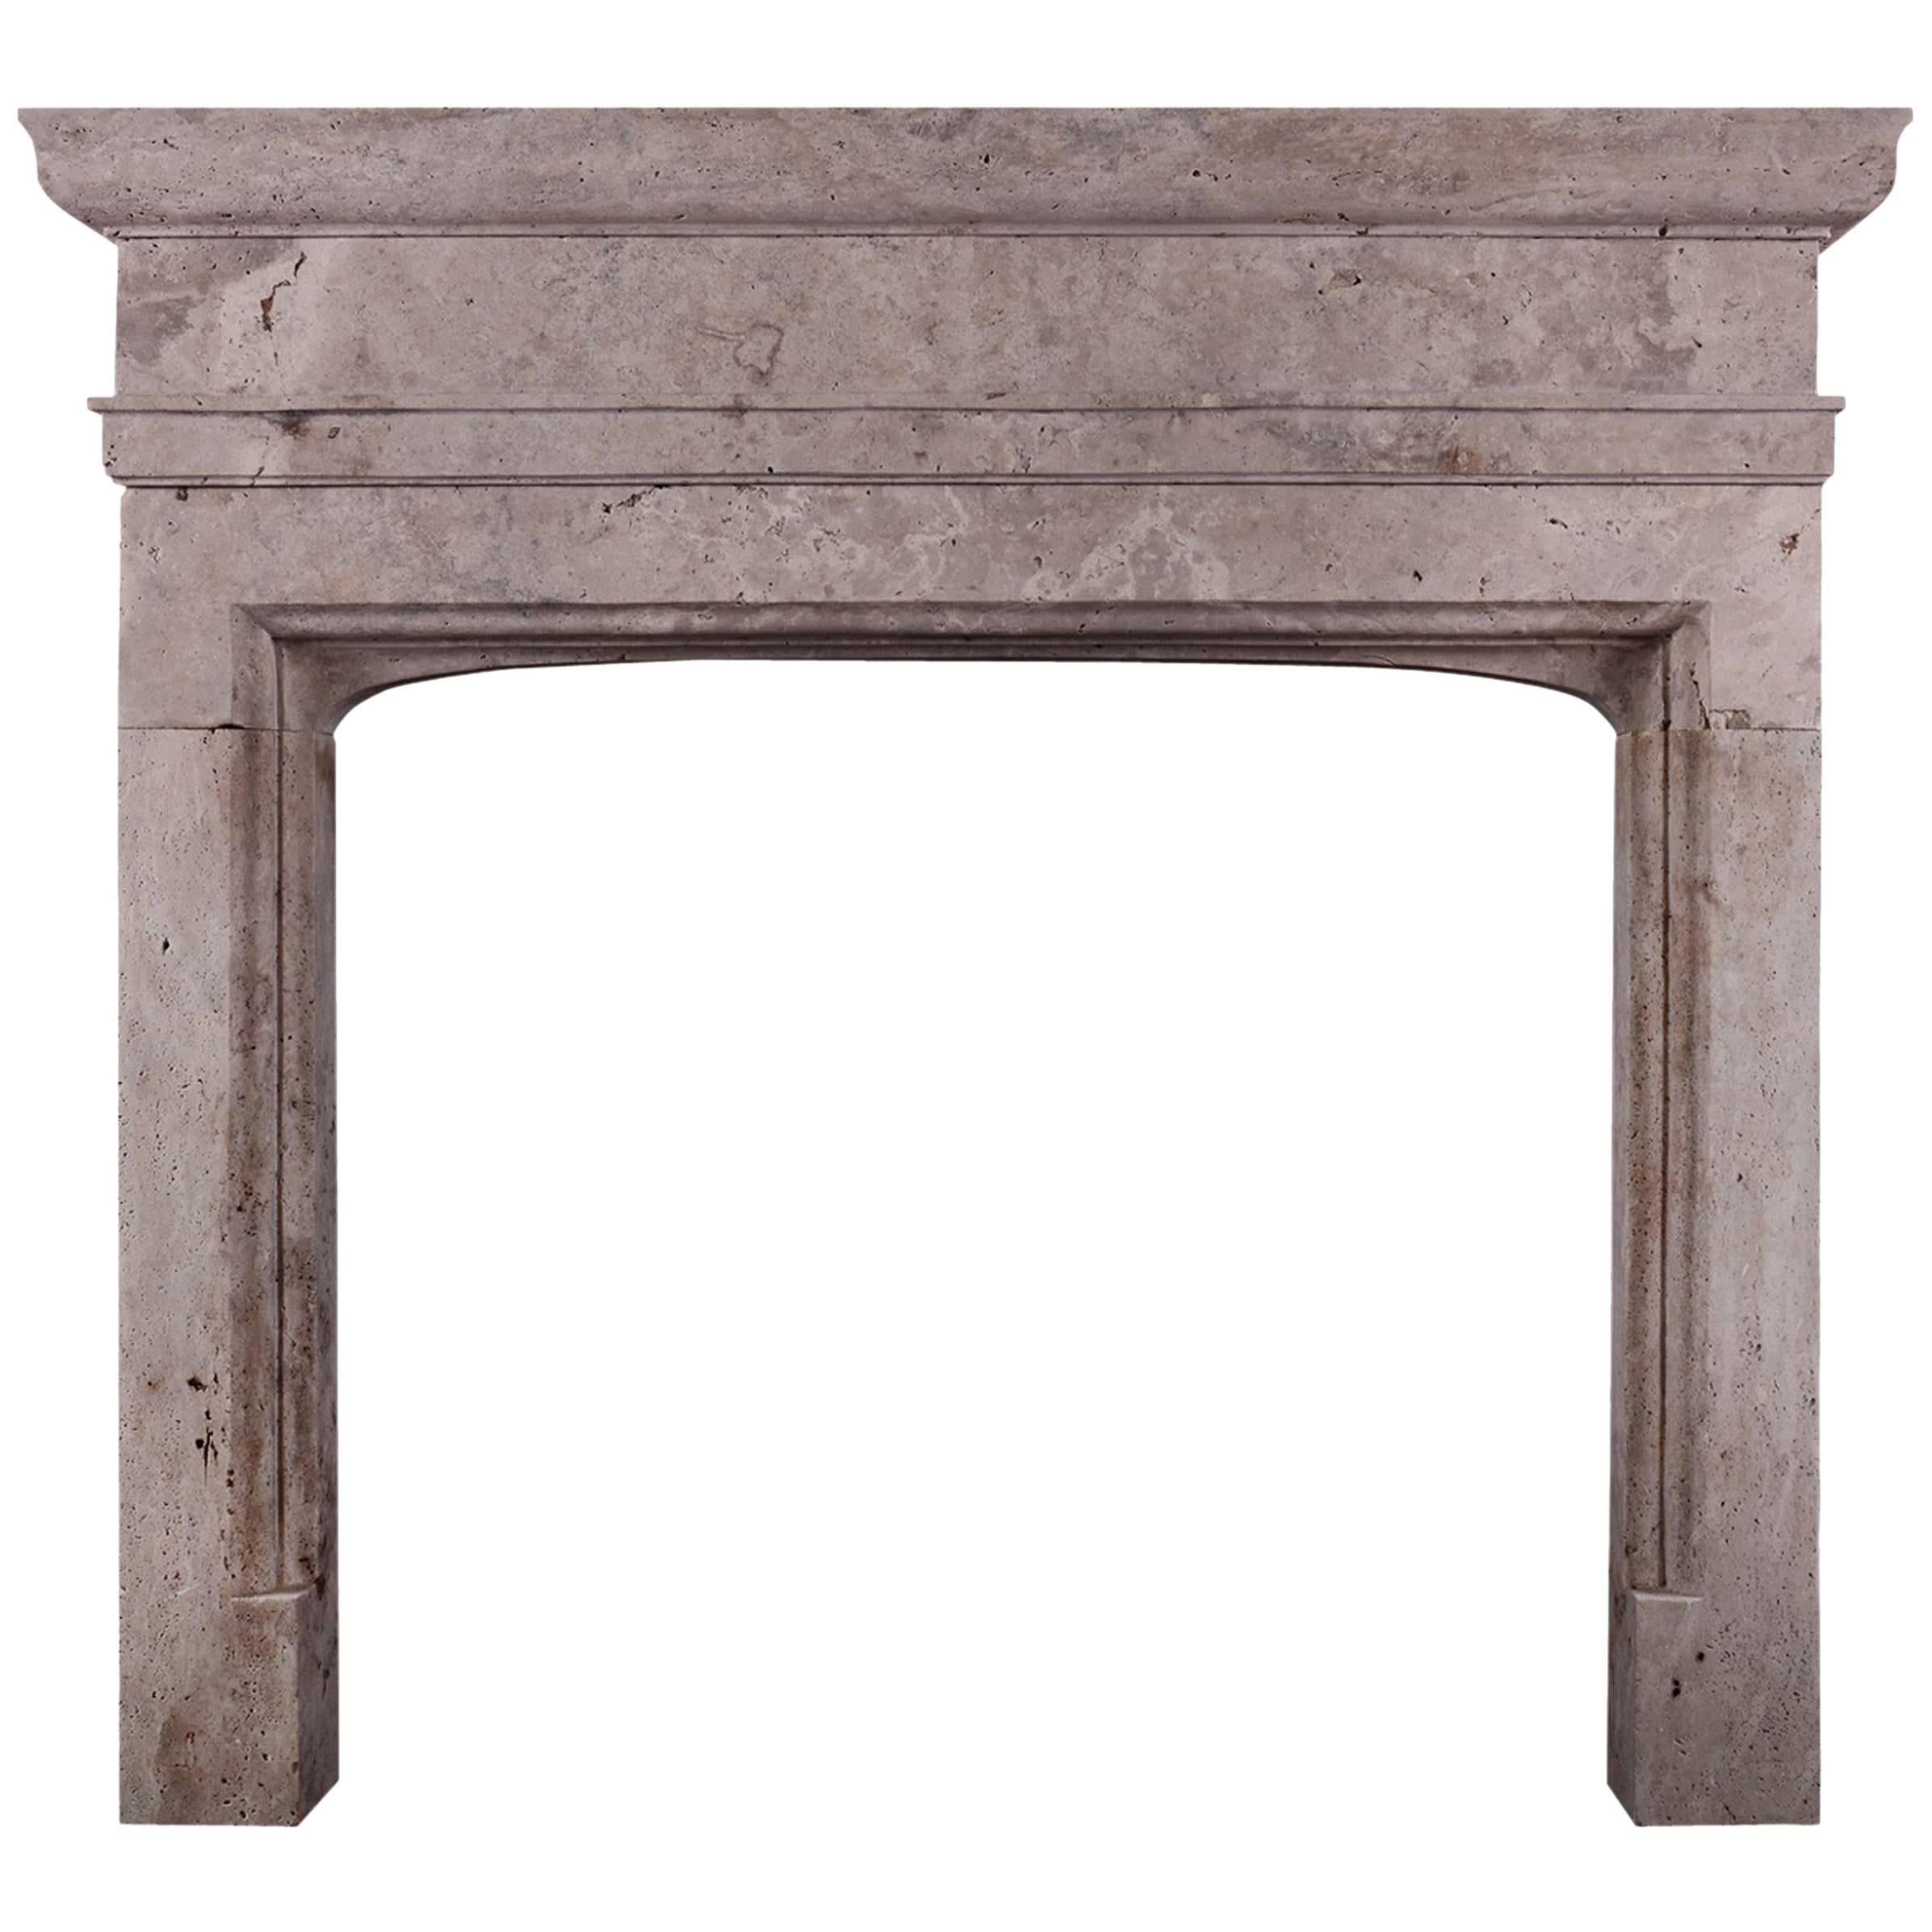 Rustic English Fireplace in the Gothic Manner